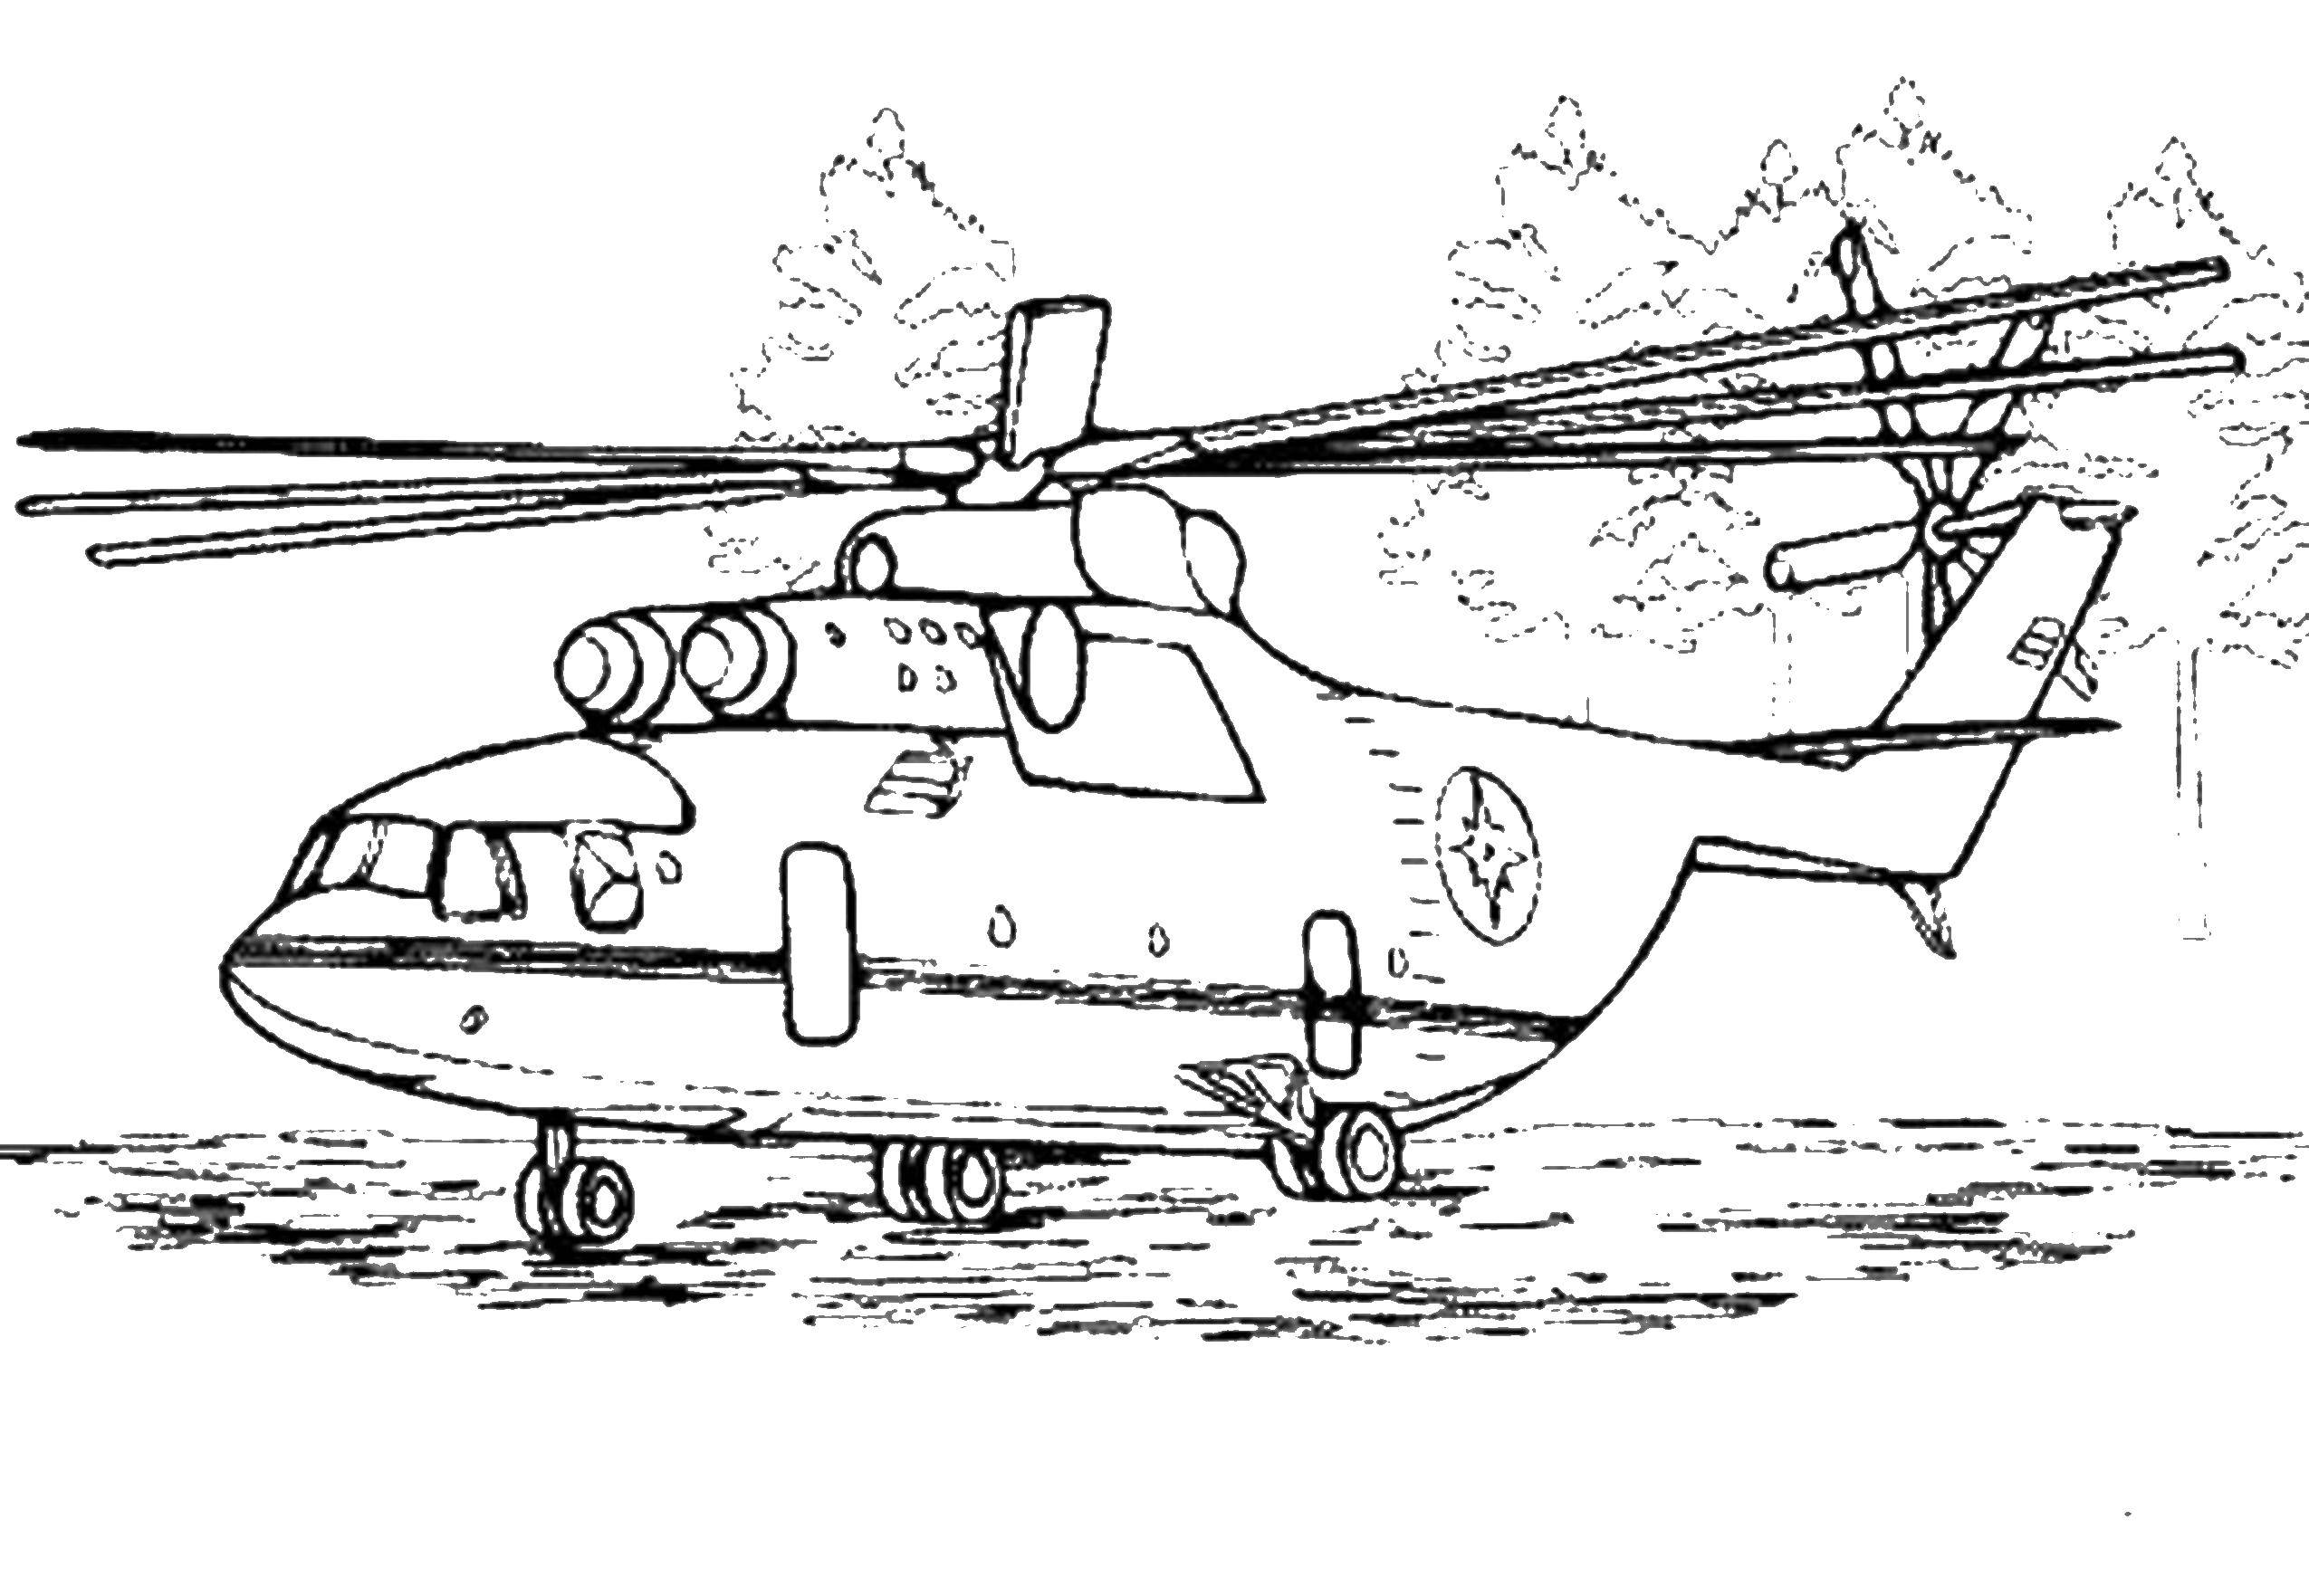 Coloring A helicopter on takeoff. Category For boys . Tags:  gunship.